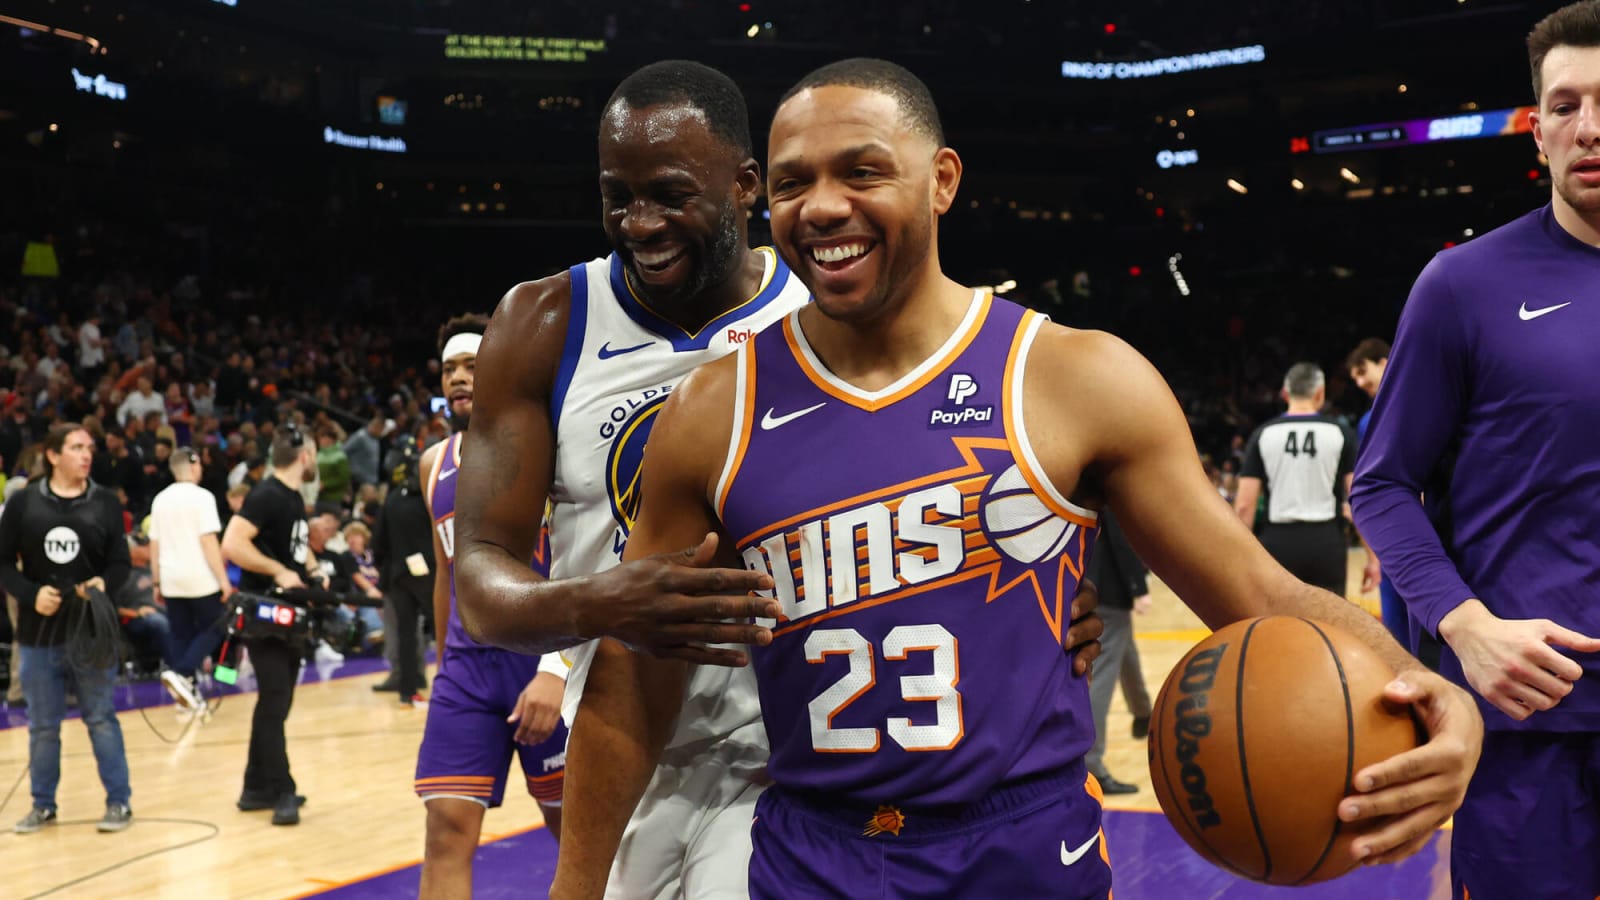 Eric Gordon receives heartwarming welcome-back tribute video ahead of Suns matchup against Rockets